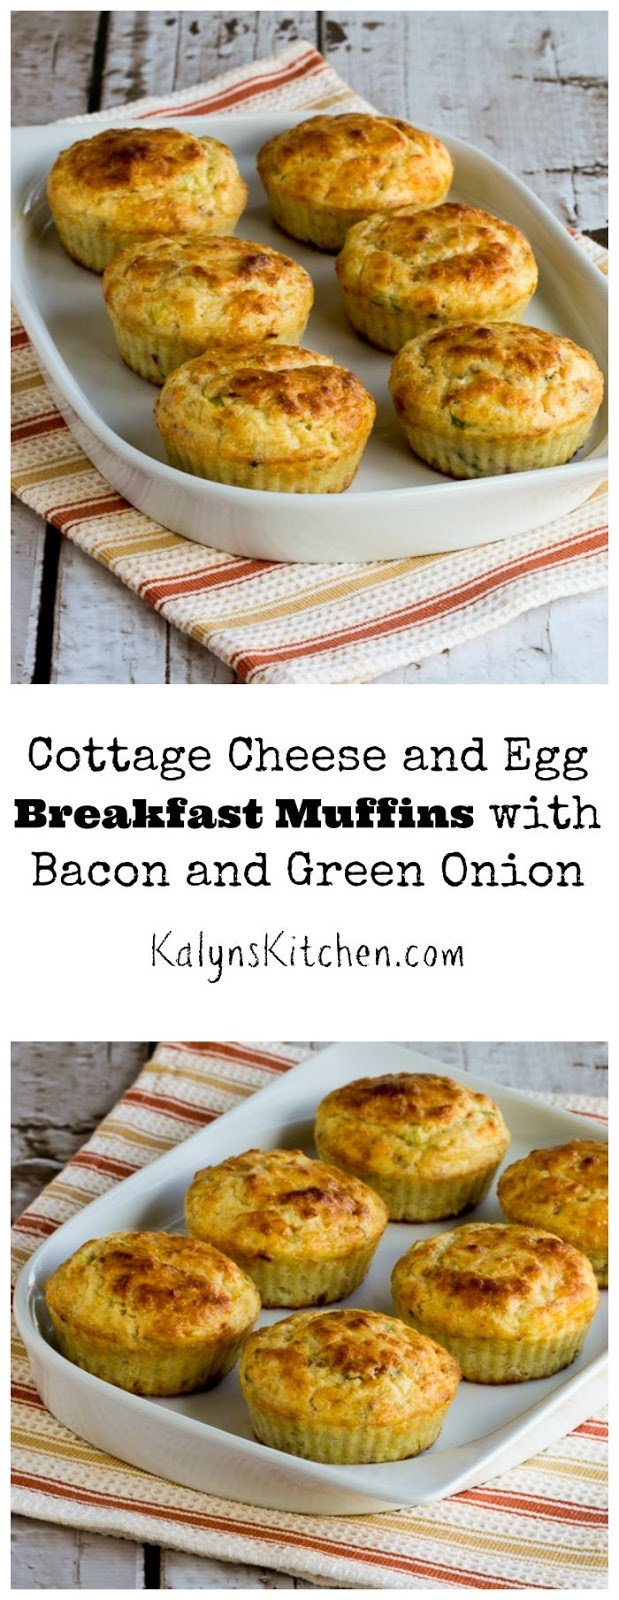 Cottage Cheese Breakfast Recipes
 Kalyn s Kitchen Cottage Cheese and Egg Breakfast Muffins